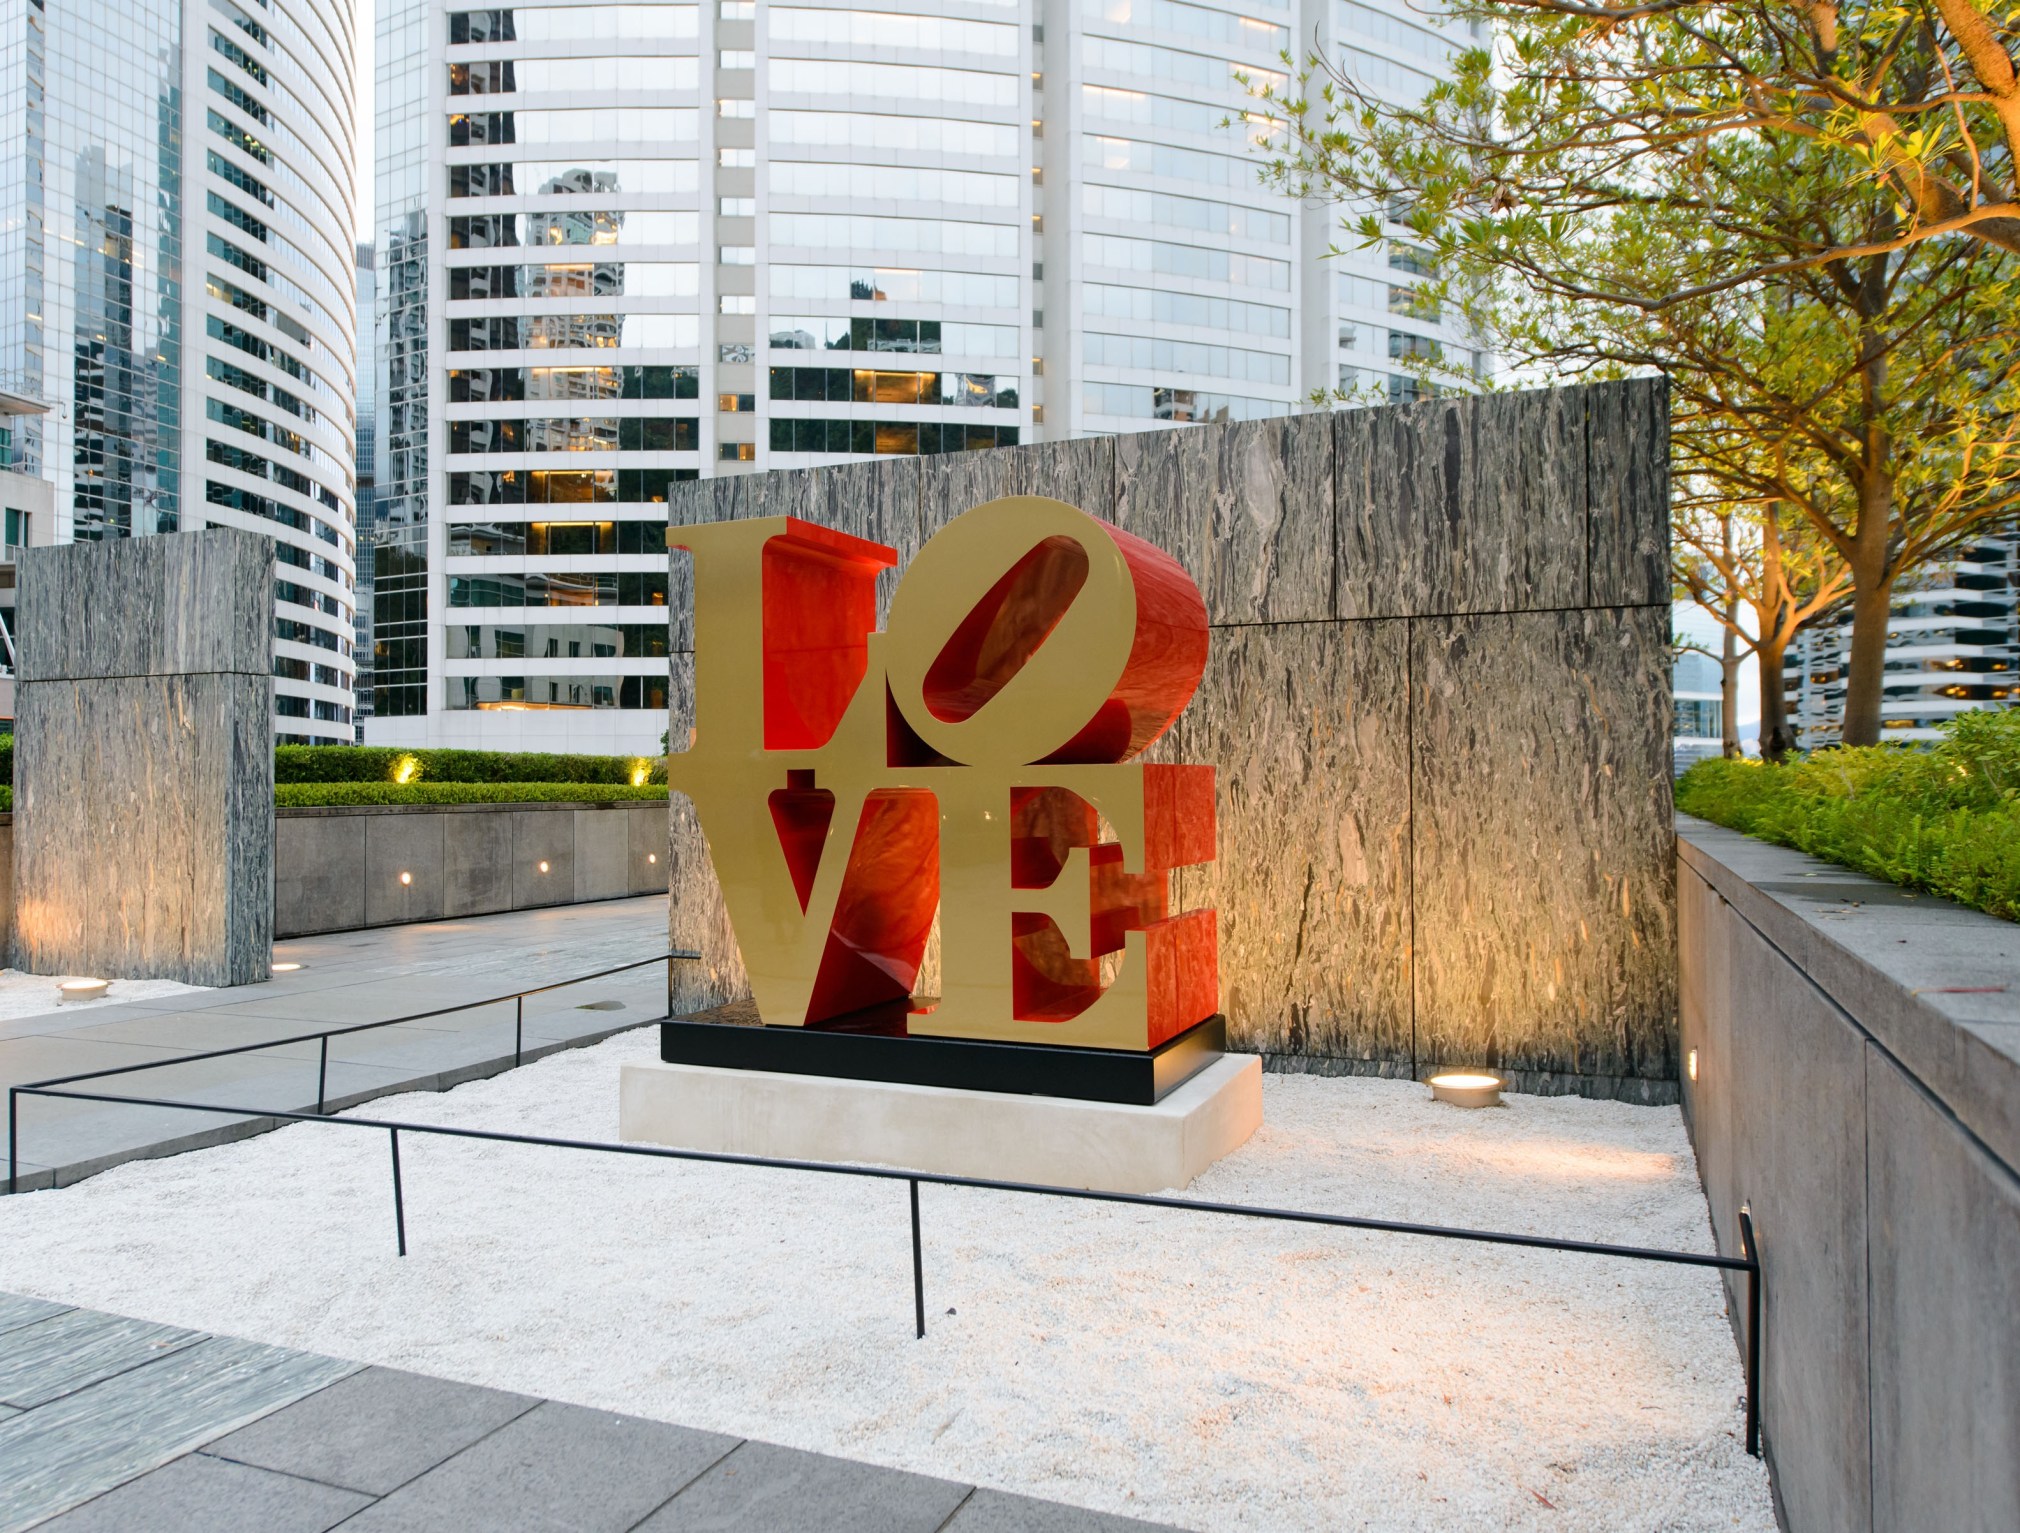 A 72 by 72 by 36 inch polychrome aluminum sculpture spelling love, consisting the letters L and a tilted letter O on top of the letters V and E. The faces of the letters are gold, and the sides are red.